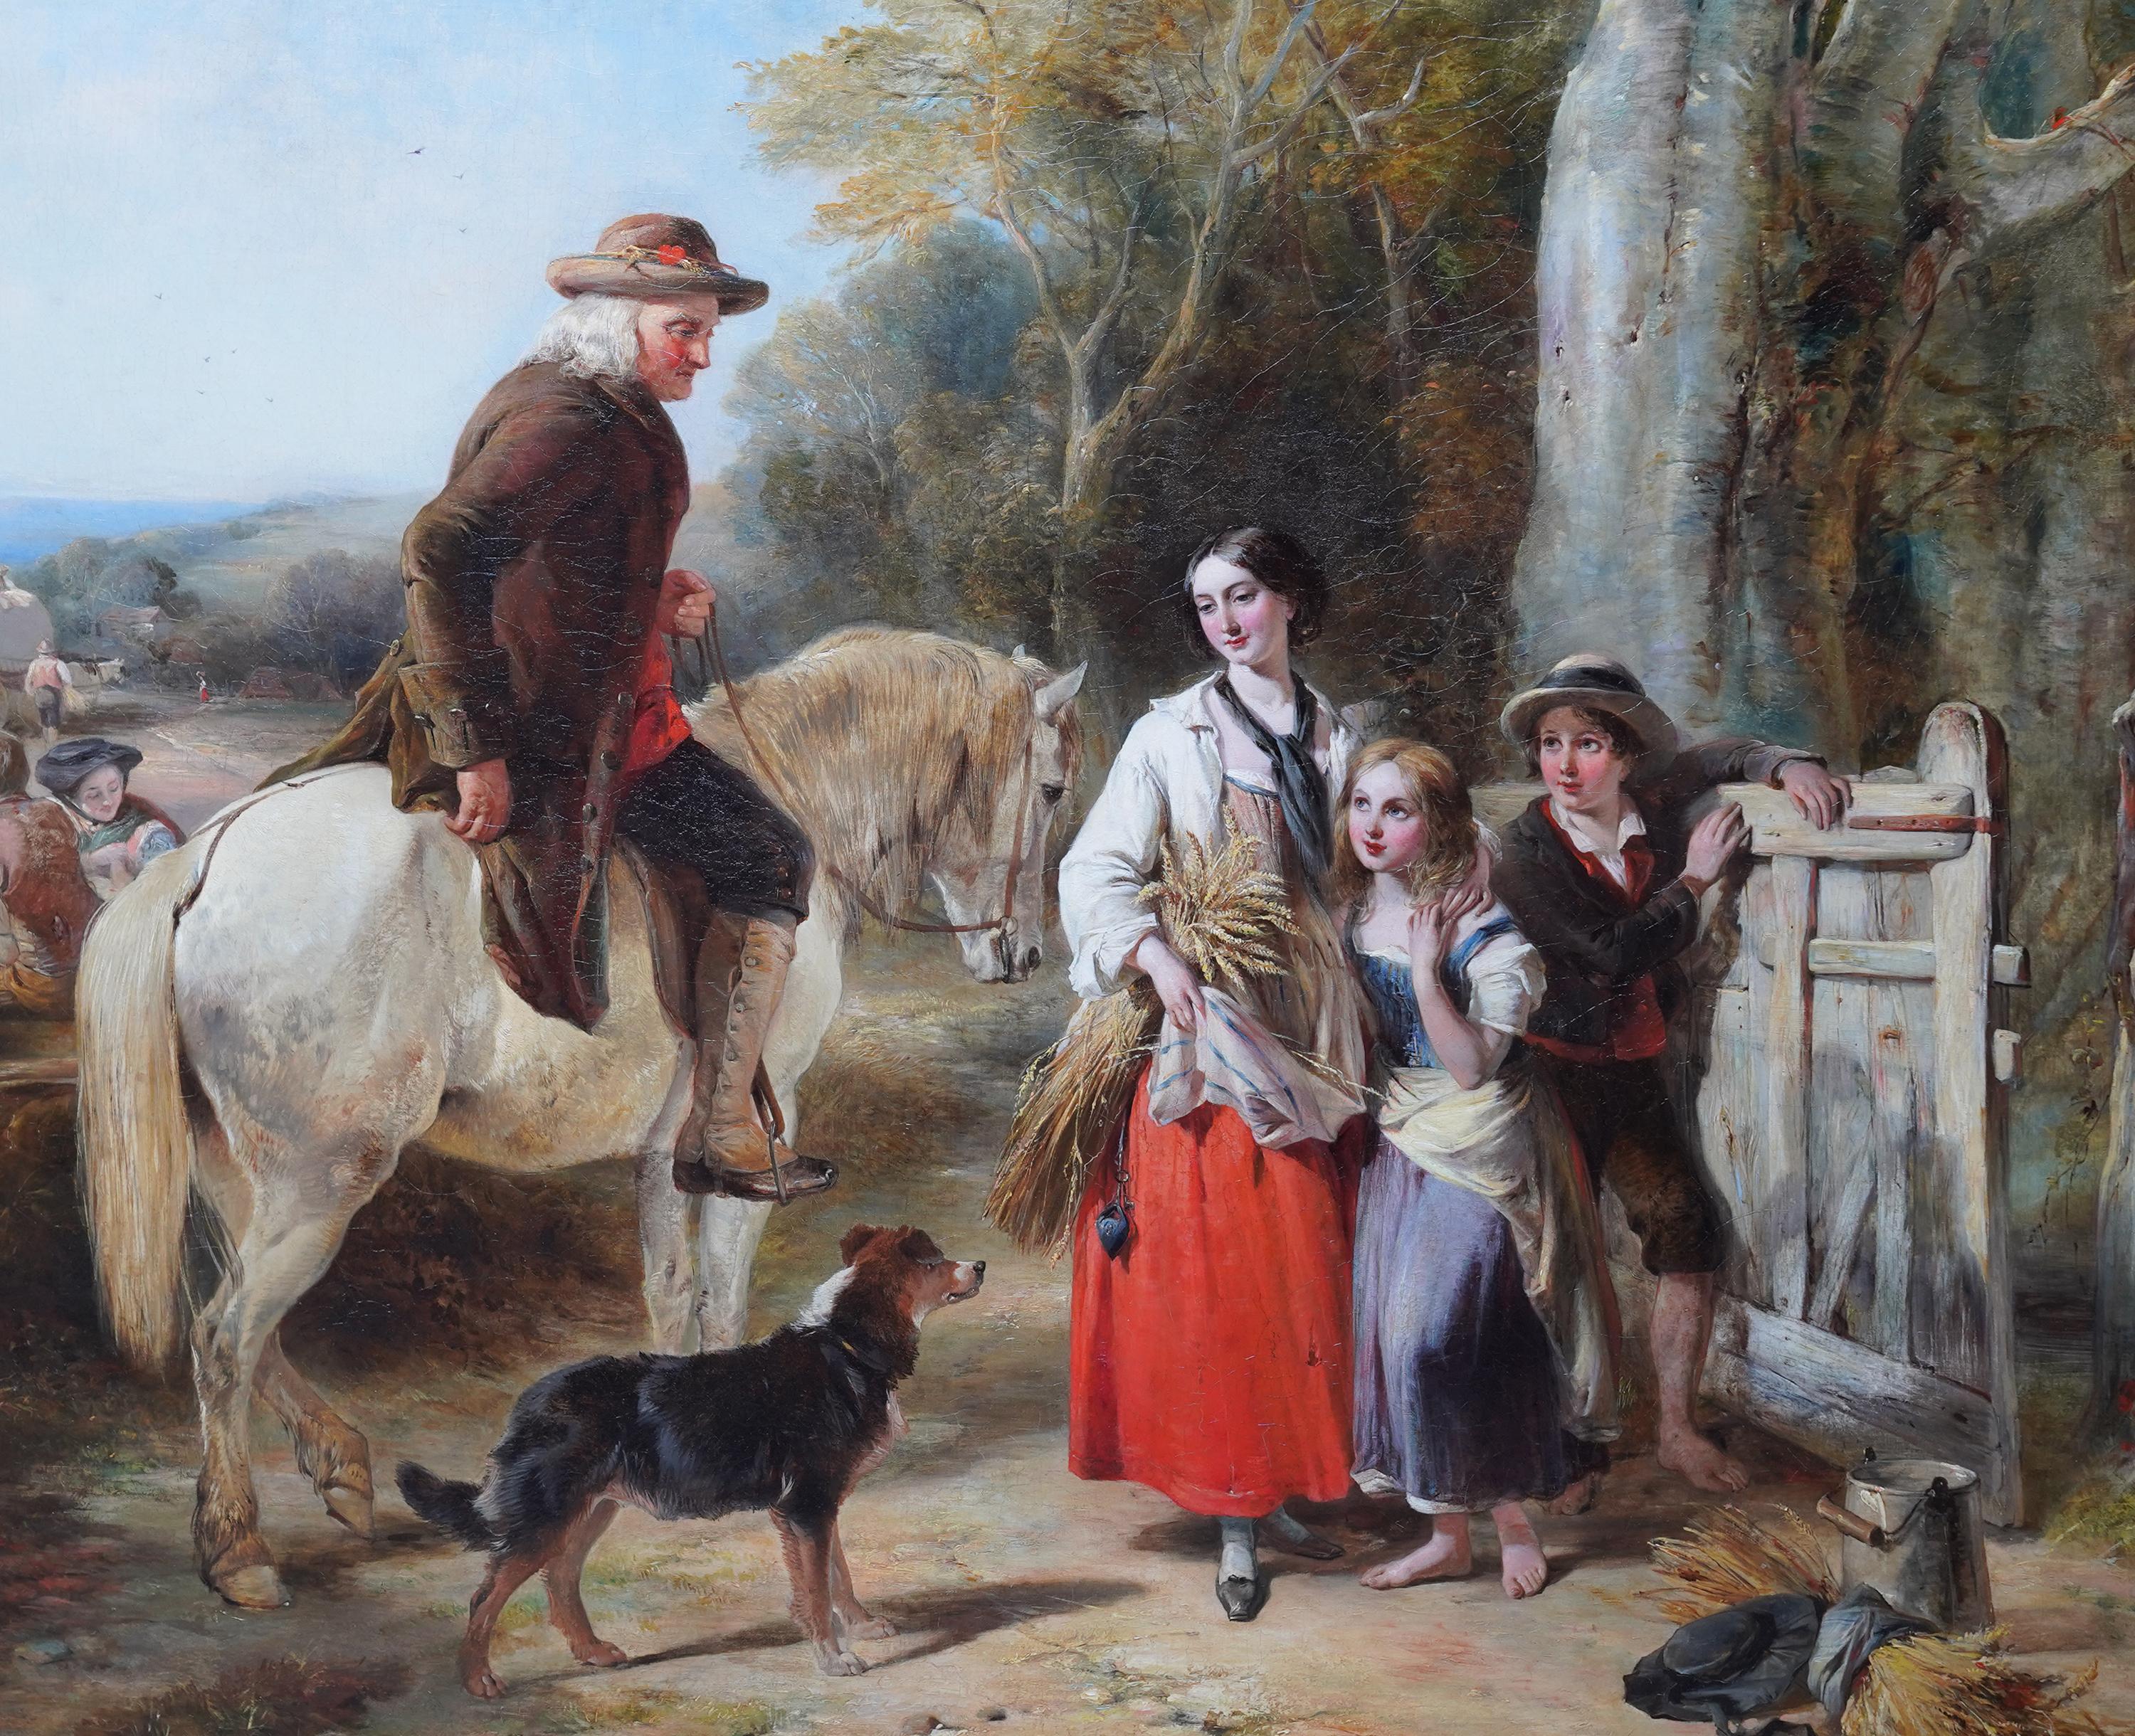 This superb large exhibited British Victorian oil painting is by noted artist Thomas Falcon Marshall. Painted in 1849 it was exhibited at the Royal Academy London that year. This large painting depicts a father on his white horse saying goodbye to